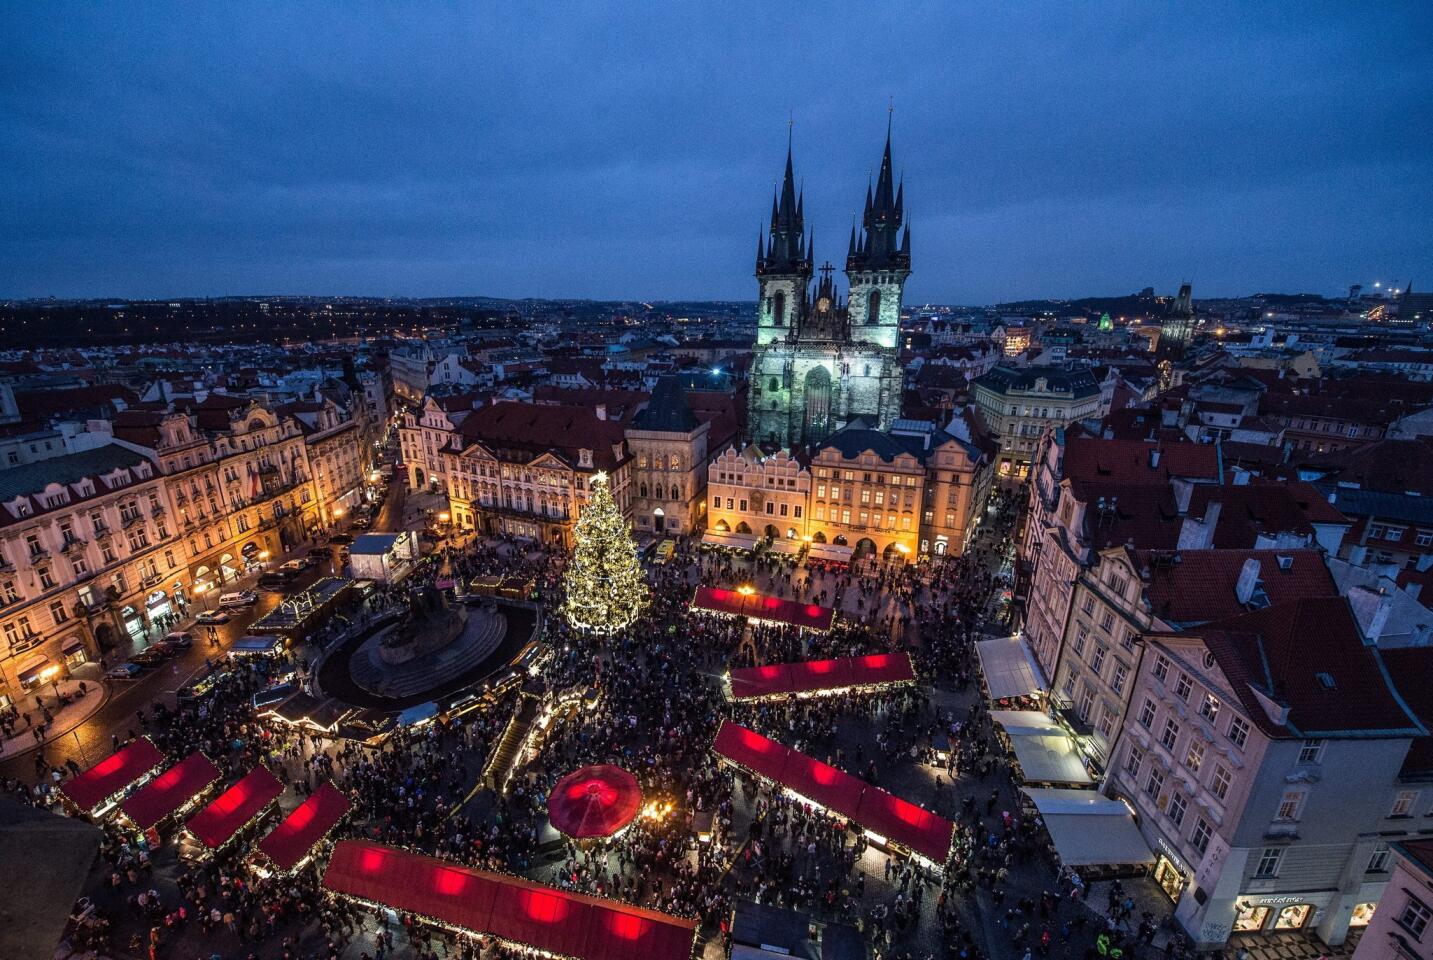 The Old Town Square in Prague has a Christmas market. Tourists and locals gather around the Christmas tree — one of the largest in the country — and listen to carolers perform. Vendors also sell gastronomic specialties, such as barbecued pork, blood sausage, Czech muffins and trdelník — a hot, sugar-coated pastry.